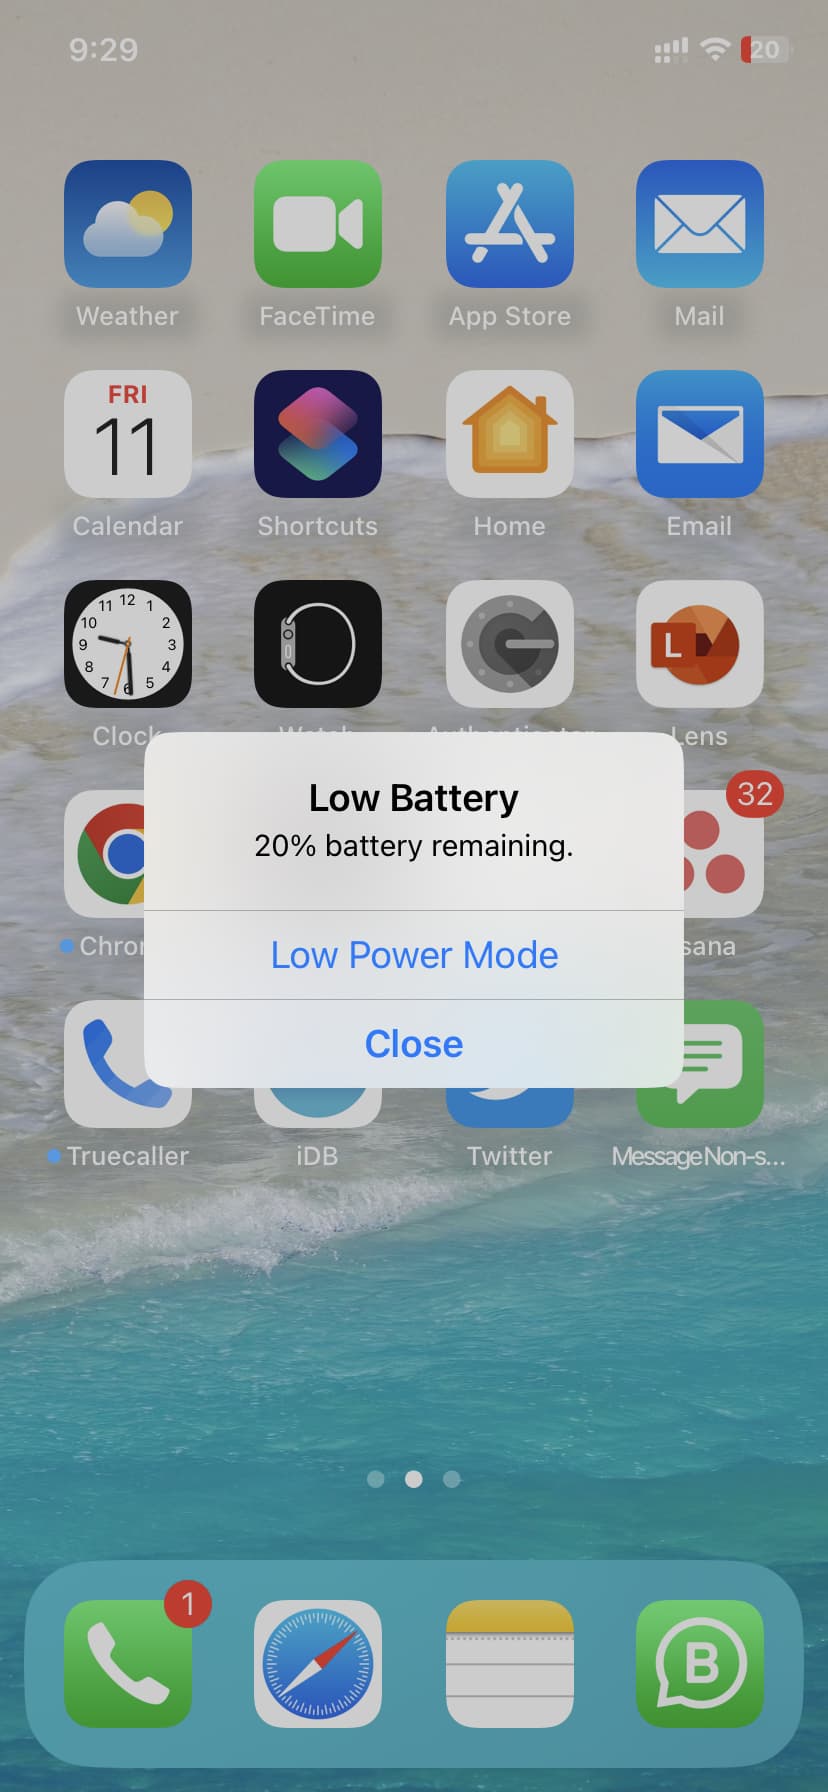 Low Battery 20% battery remaining popup on iPhone